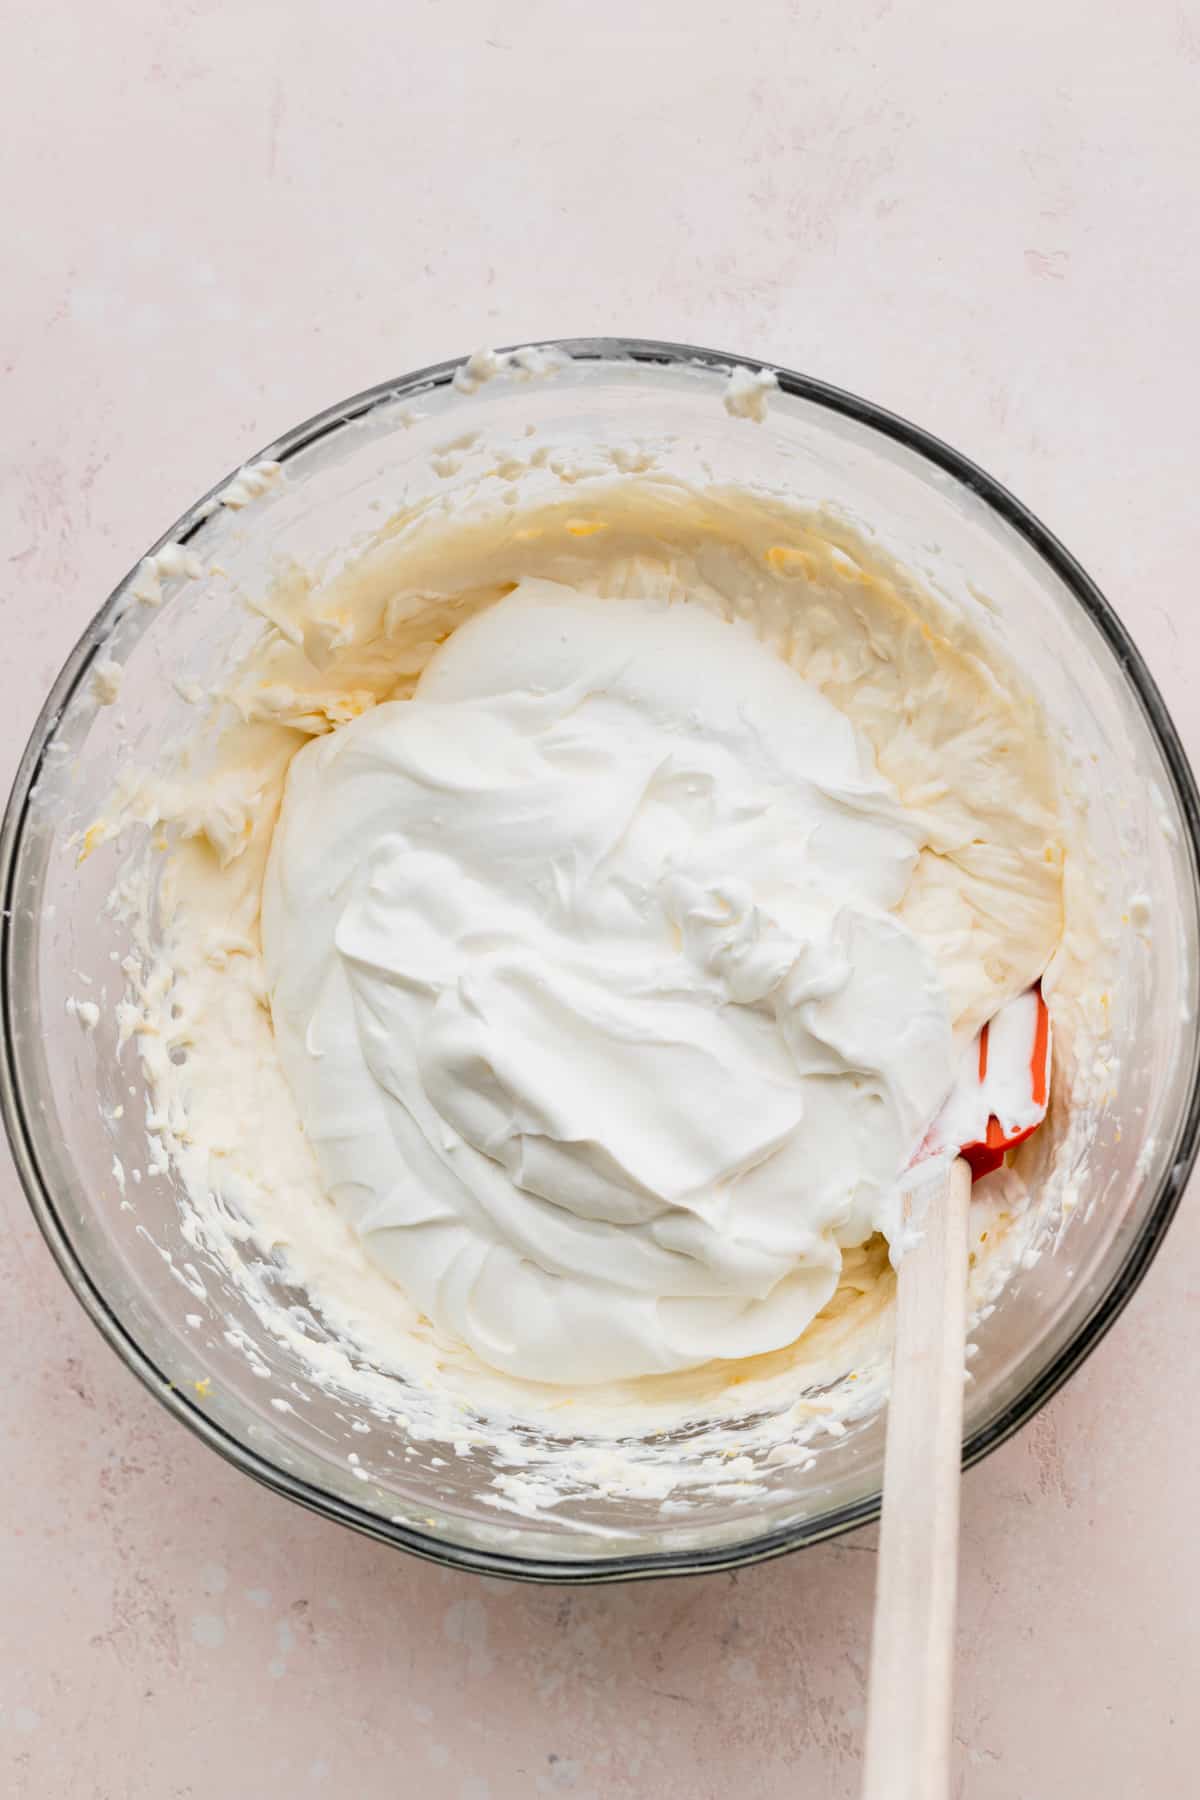 Whipped cream on top of cream cheese mixture in a glass bowl.